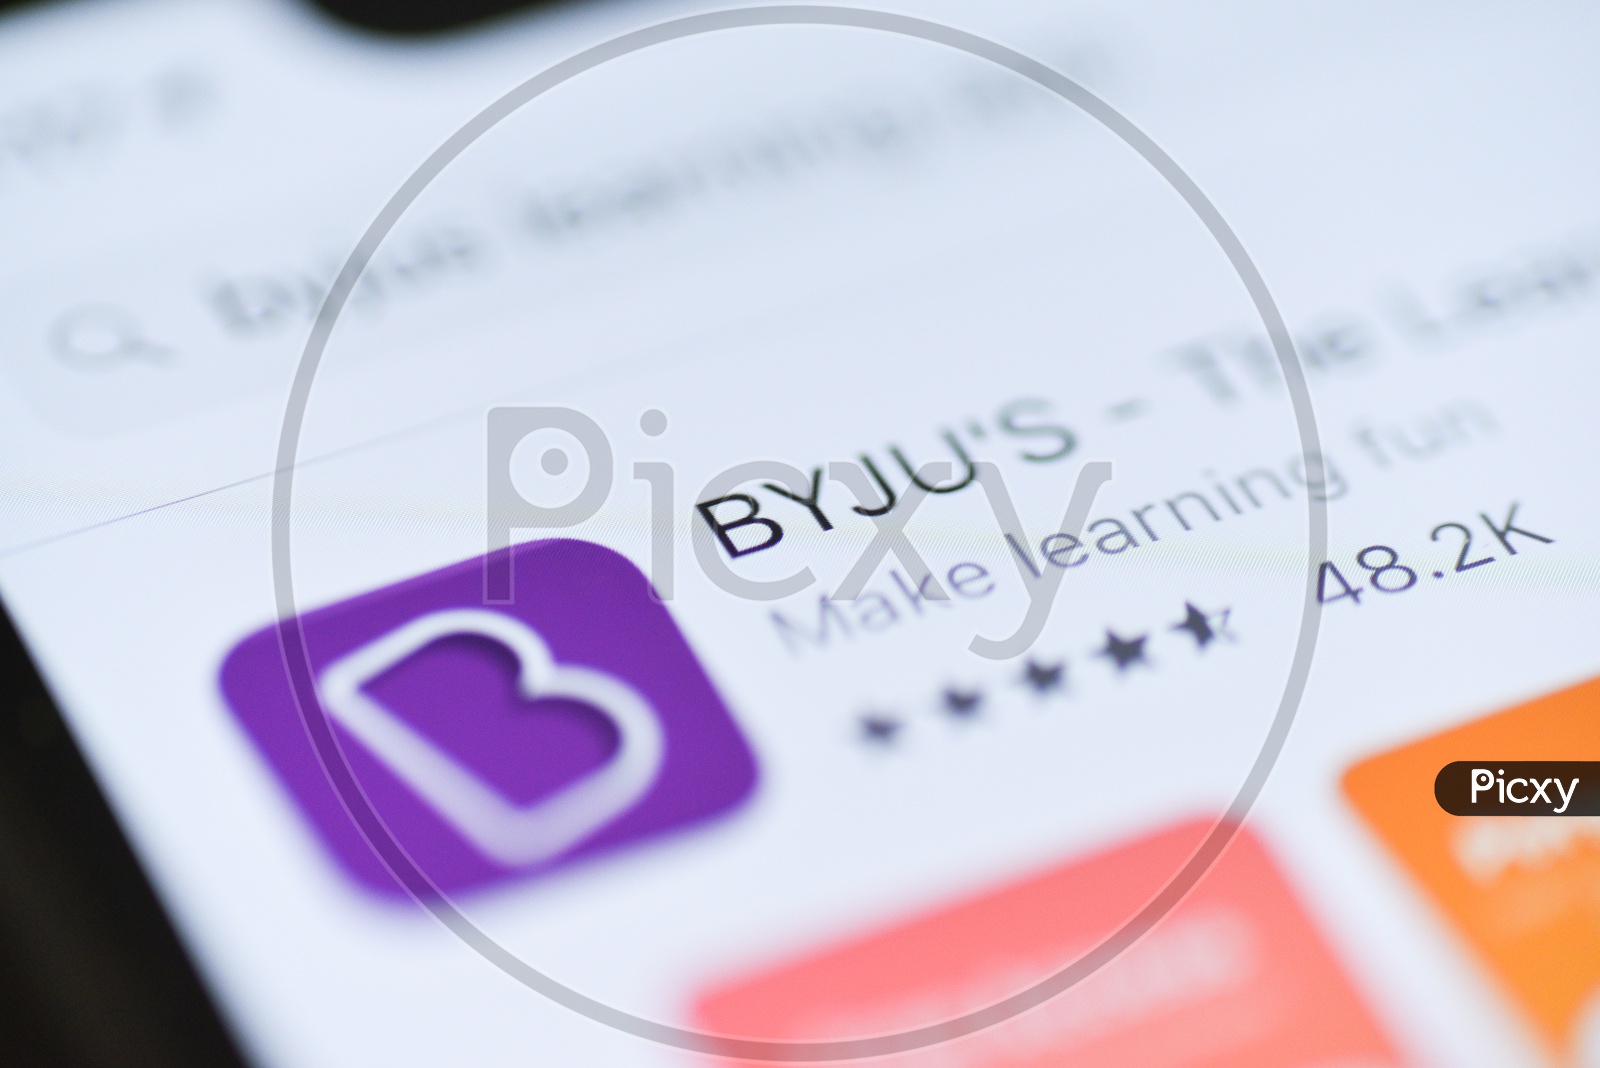 BYJU's Or BYJUS The Learning App or Application in  Mobile  or Smartphone  Closeup